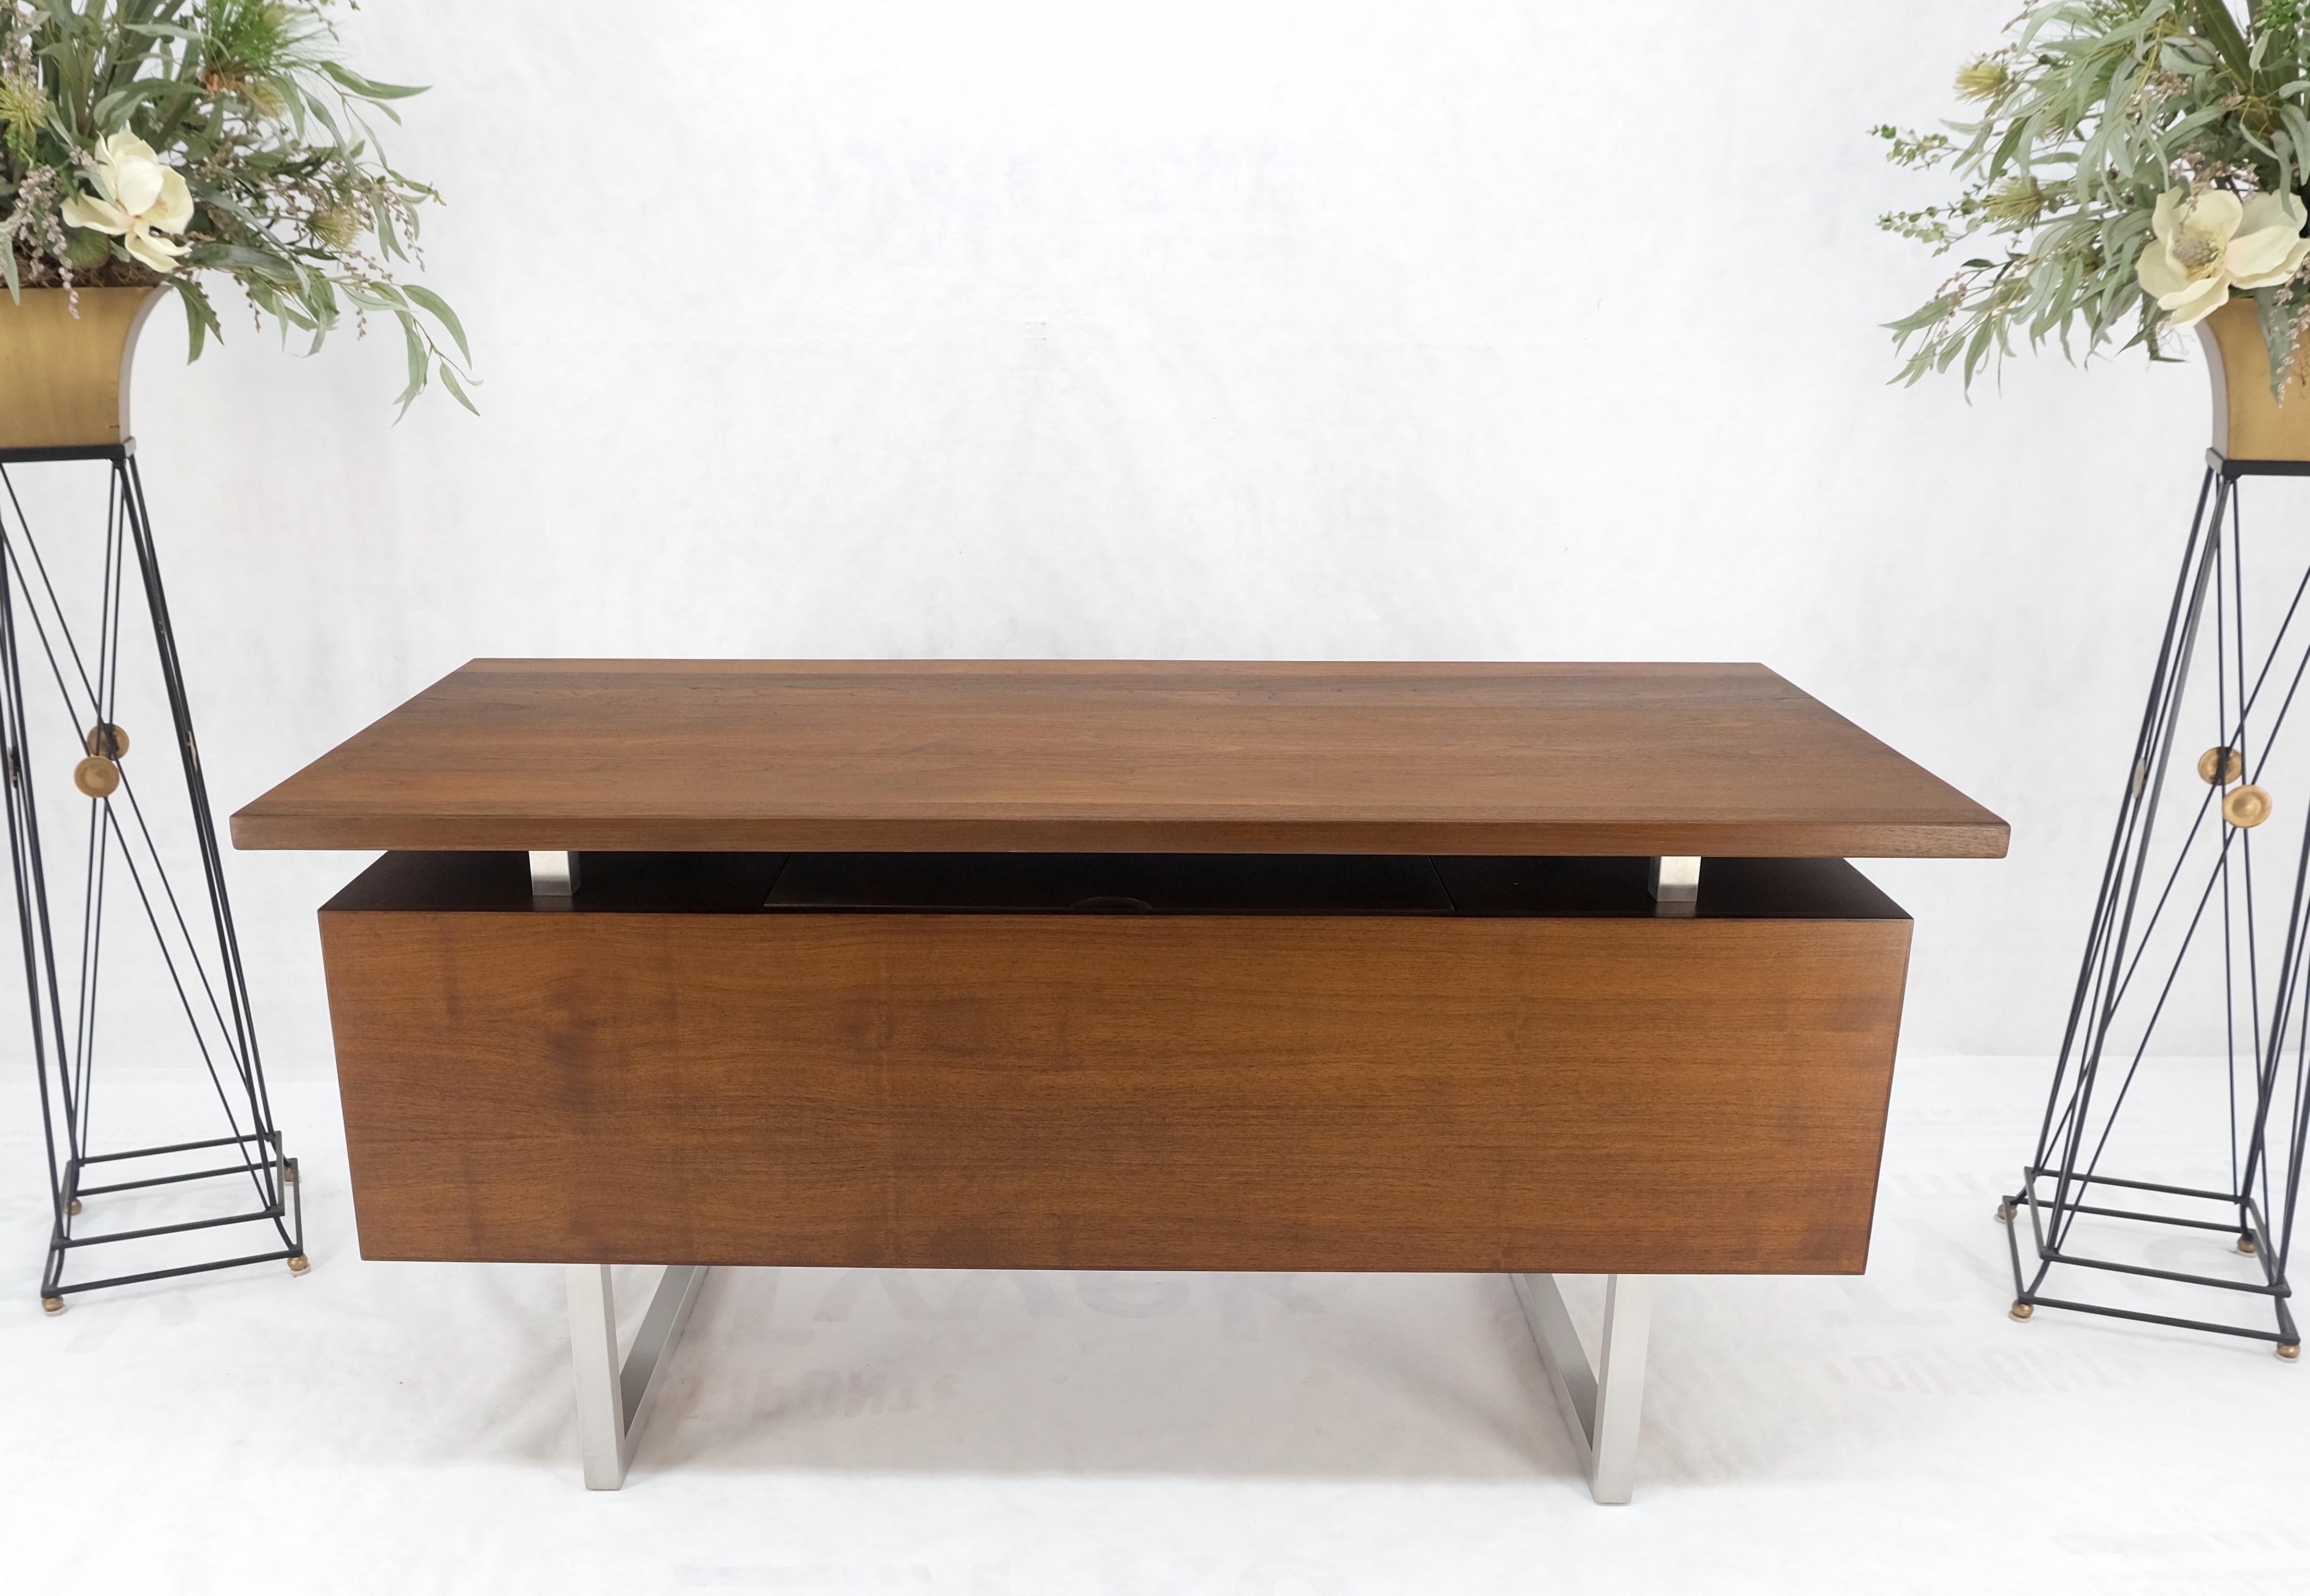 American Solid Walnut Mid-Century Modern Floating Top All Restored Desk Table Mint! For Sale